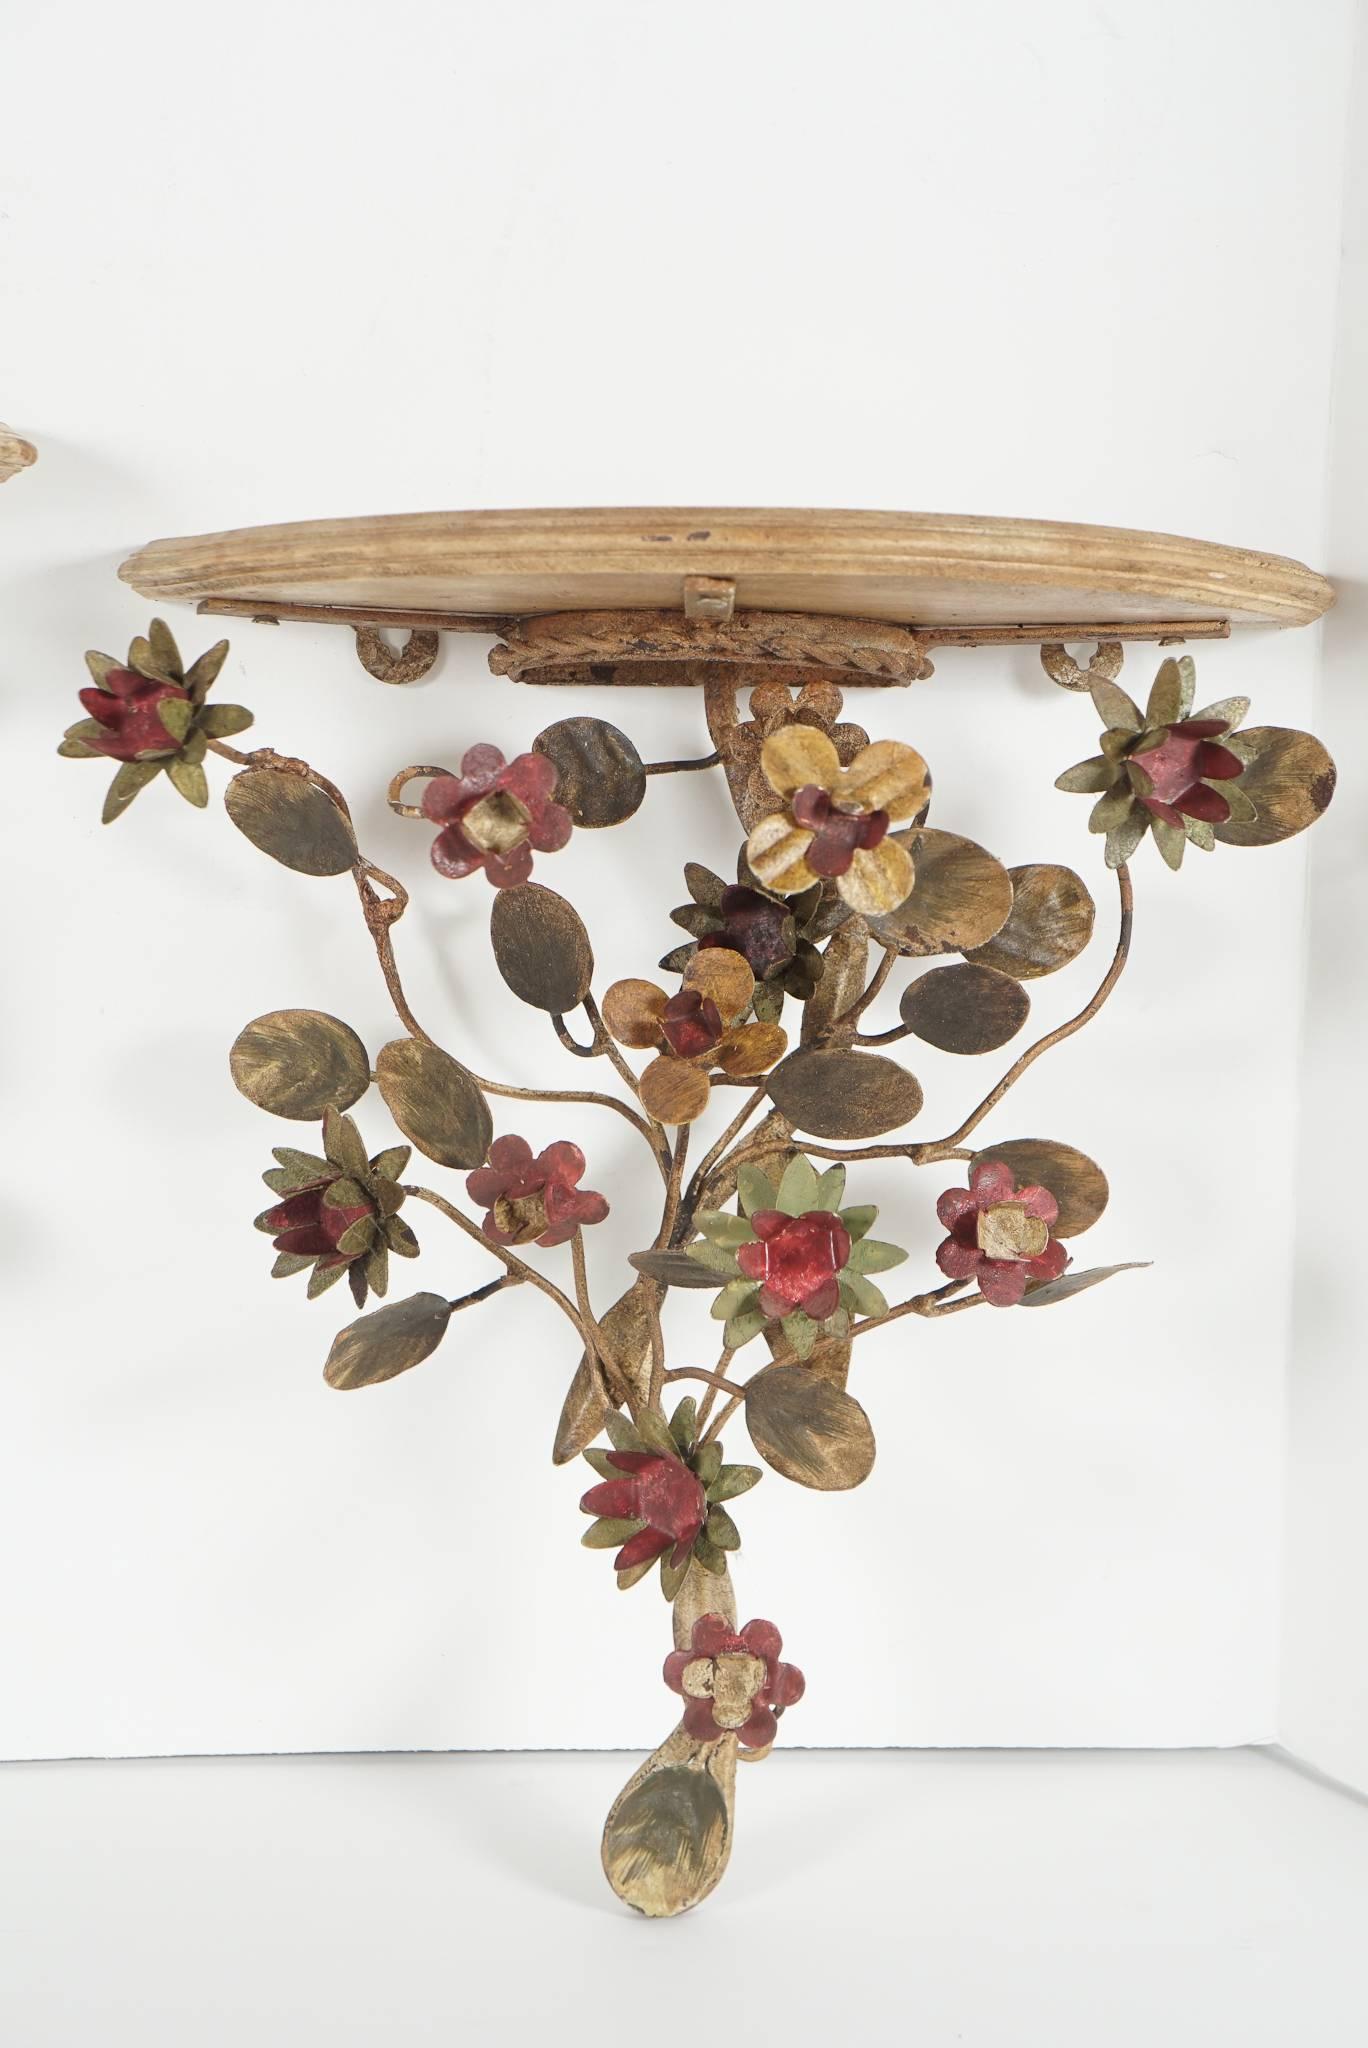 This lovely pair of tole peinte wall brackets from the estate of Mrs. Bunny Mellon are most likely French but might be Italian specifically Piedmontese. Crafted by hand in the form of flower heads and foliage forming the support for the shelf. All